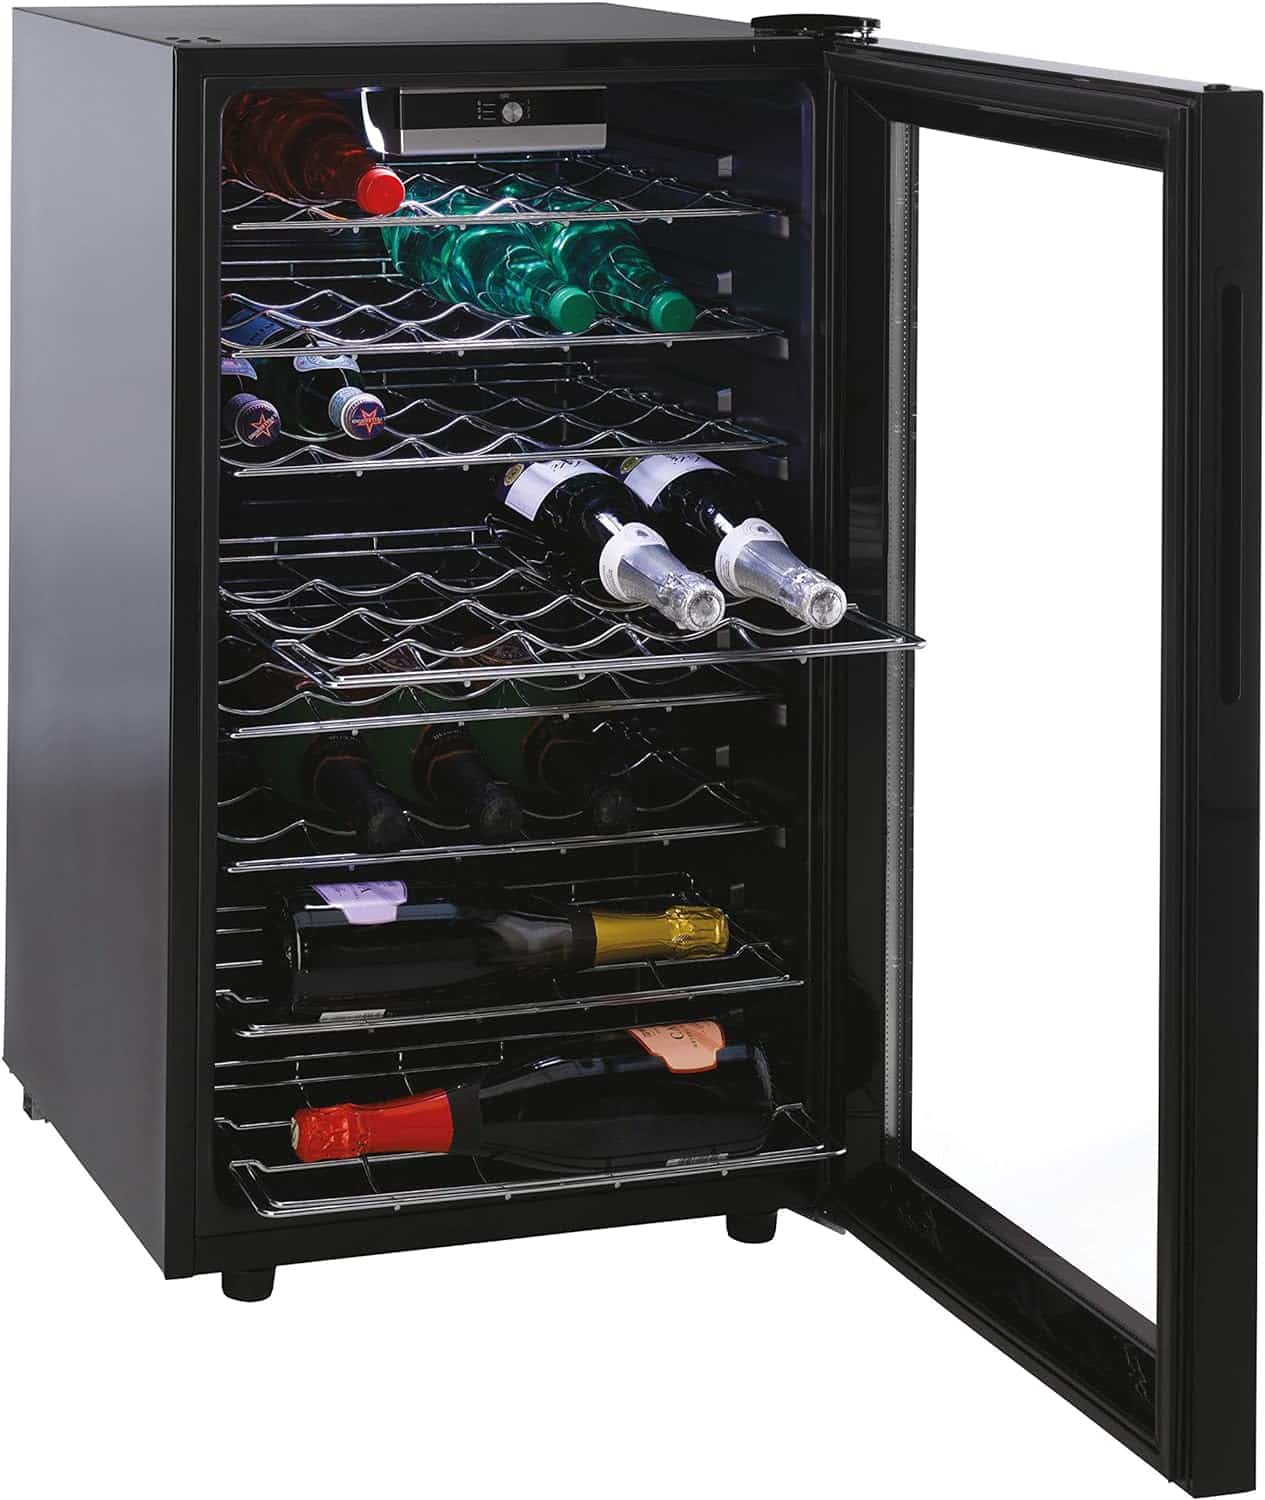 CANDY CWC150UK Freestanding Wine Cooler, LED light, 85 liters-1638